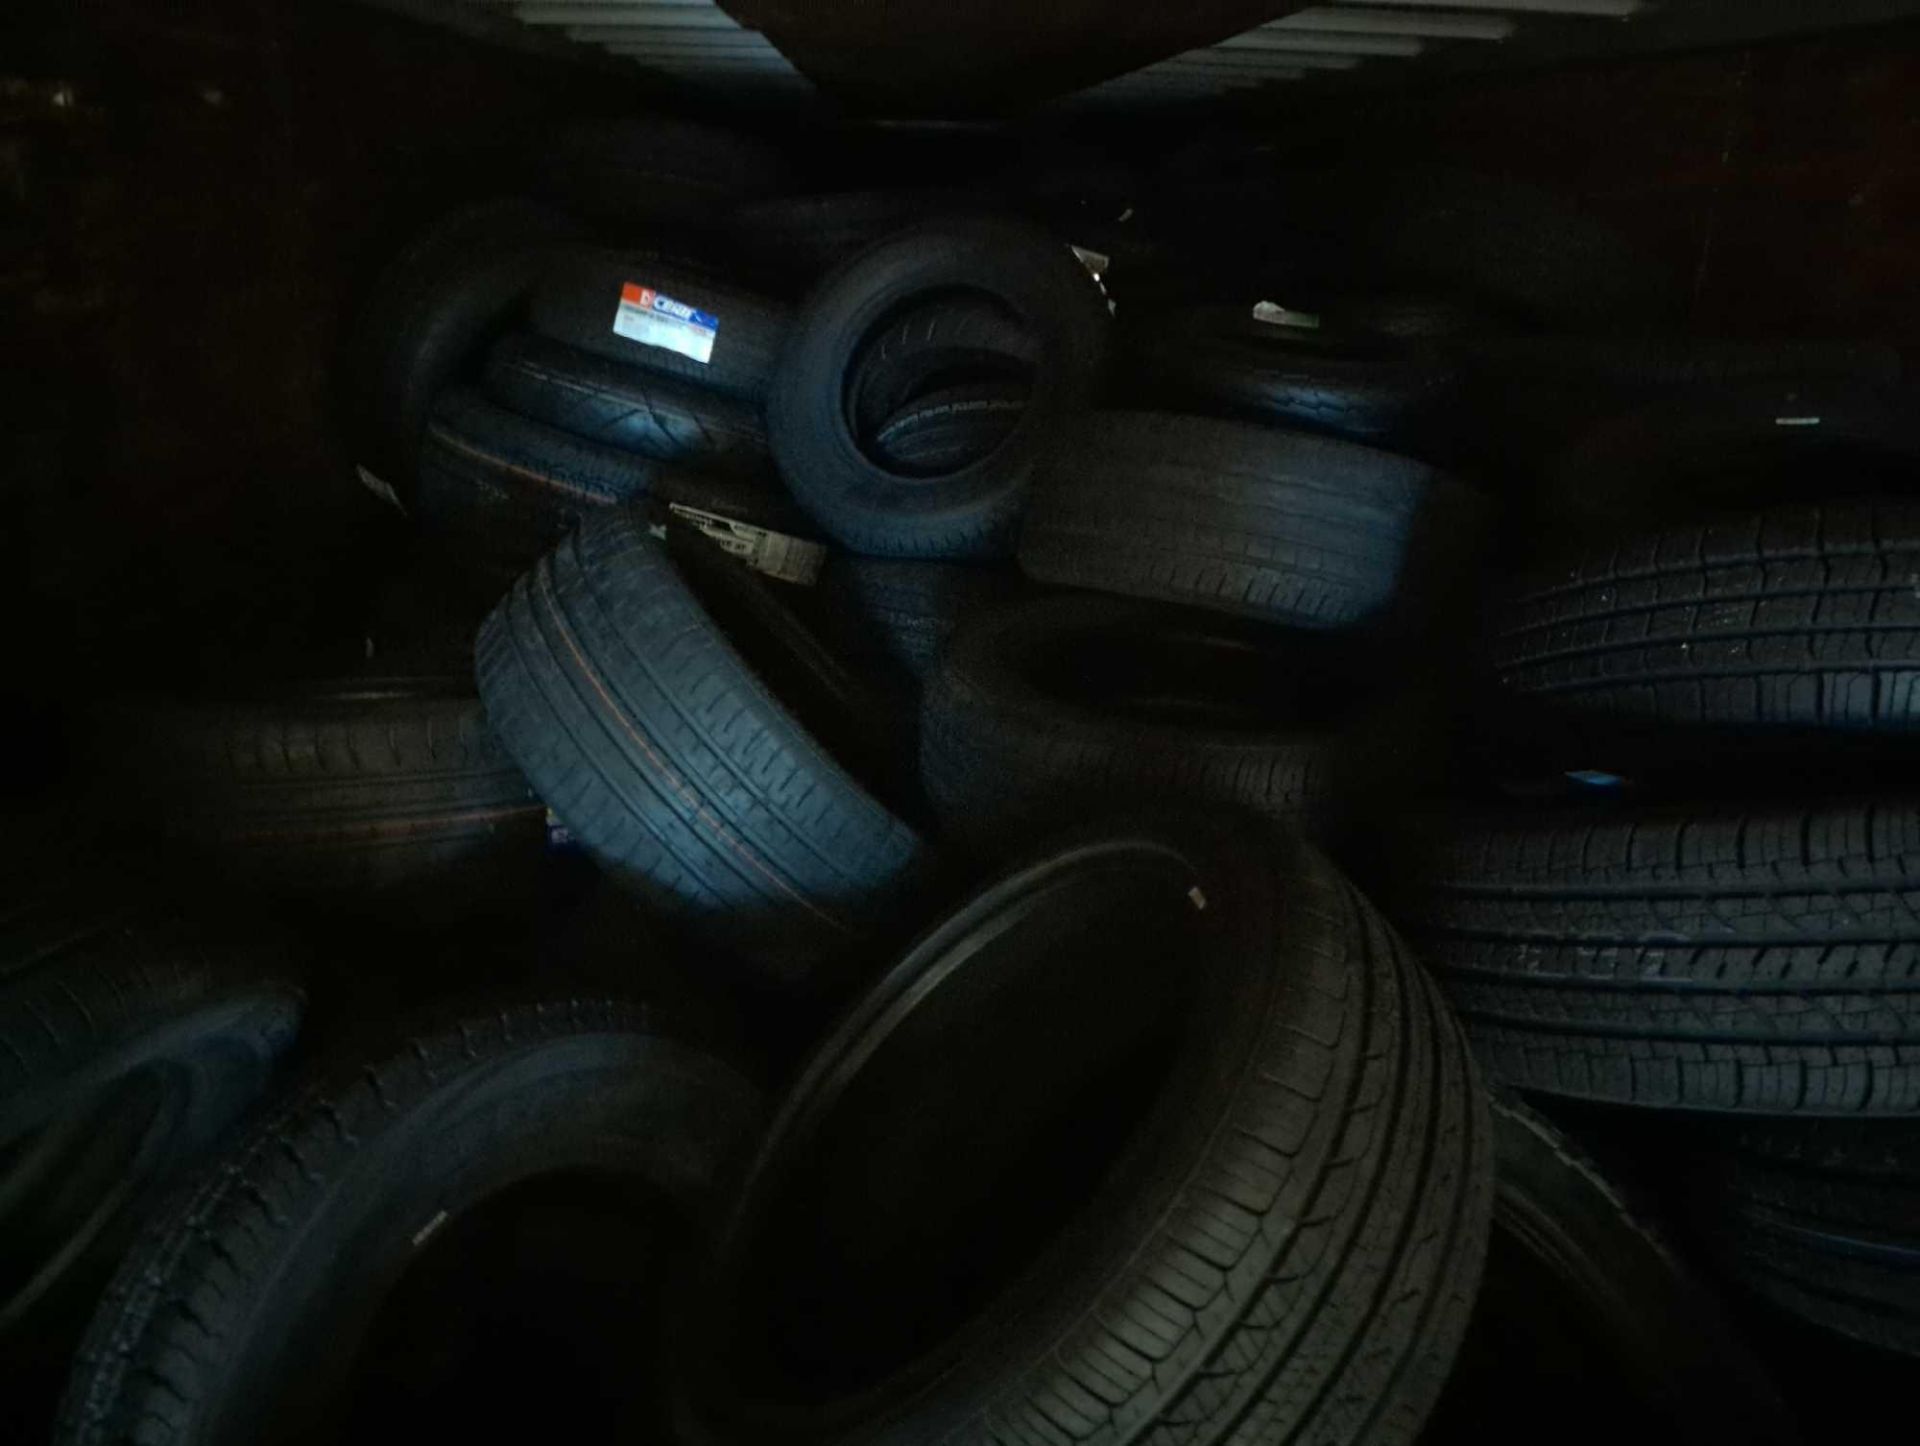 TIRES - Image 8 of 15